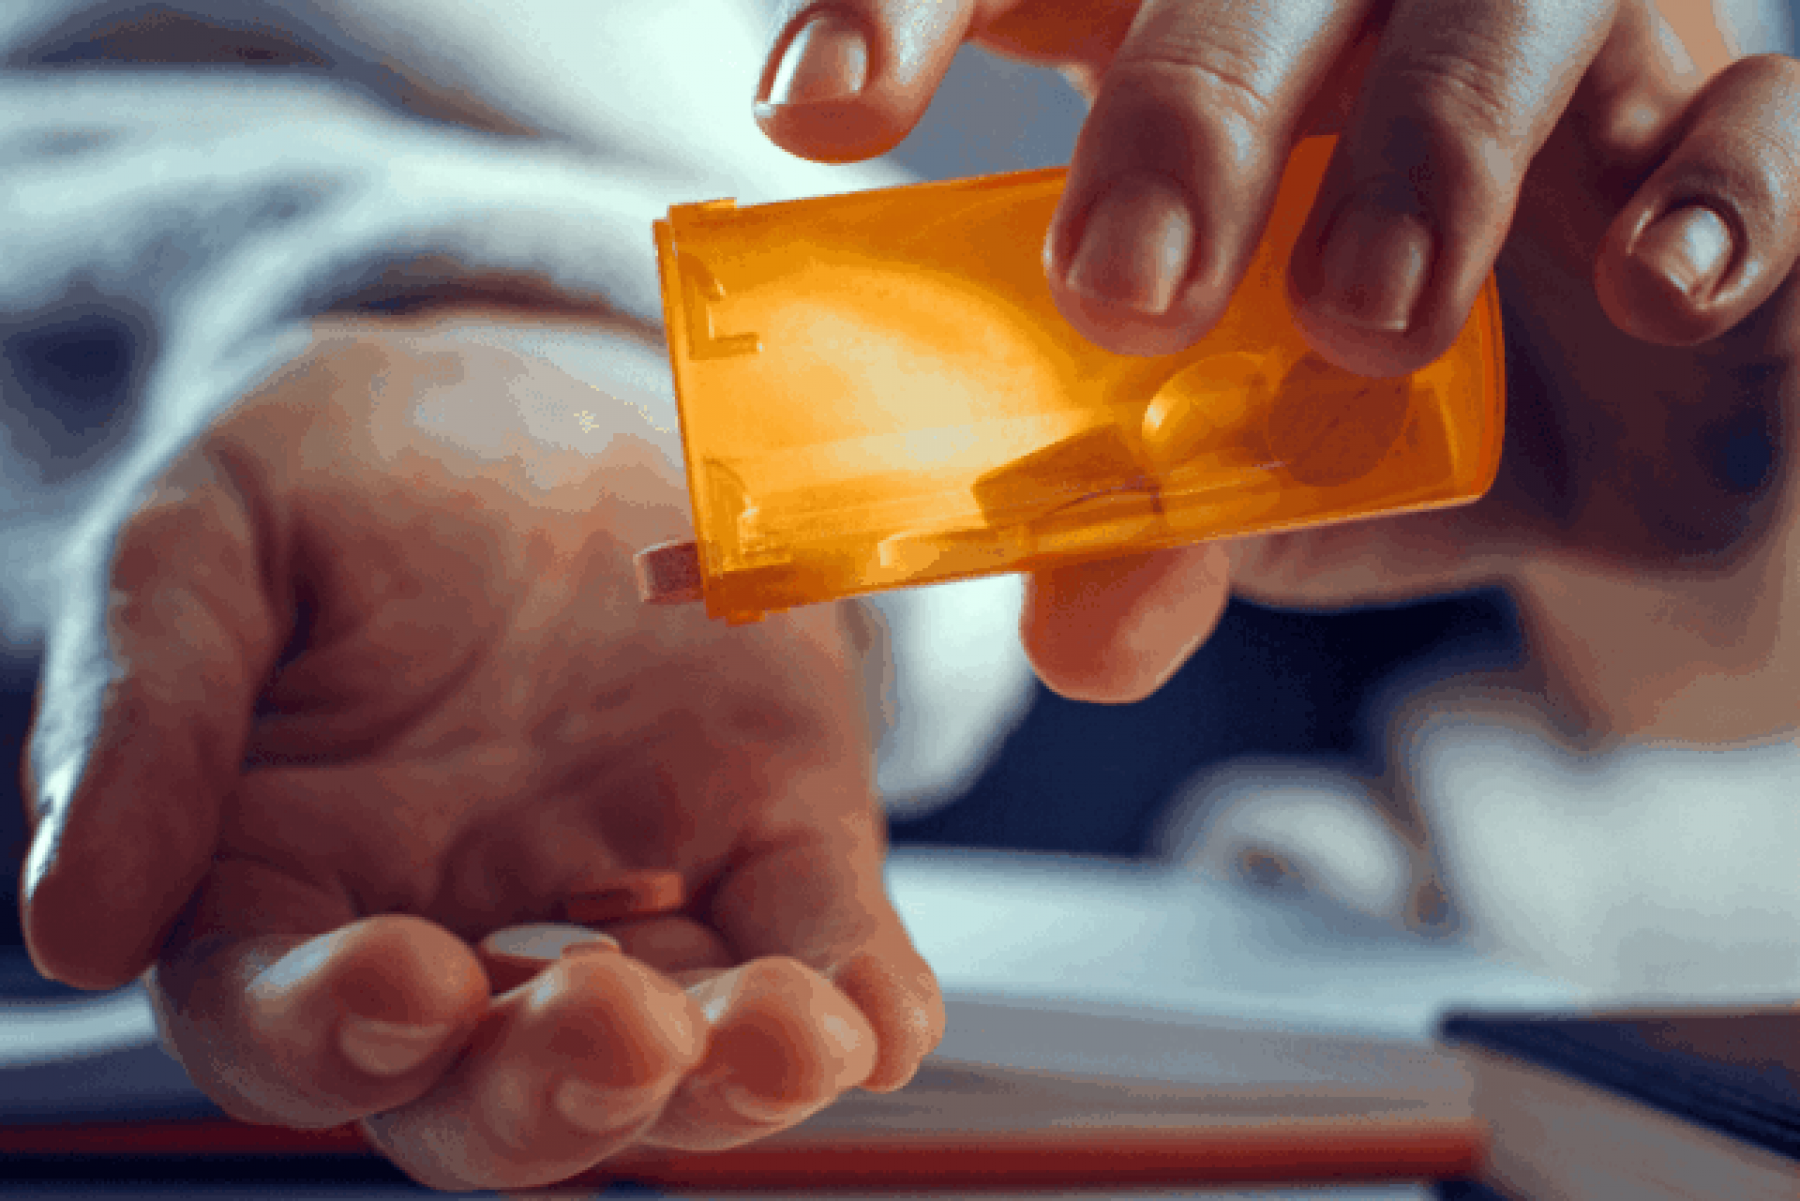 Healthcare professional shaking a pill from a bottle into their open hand.